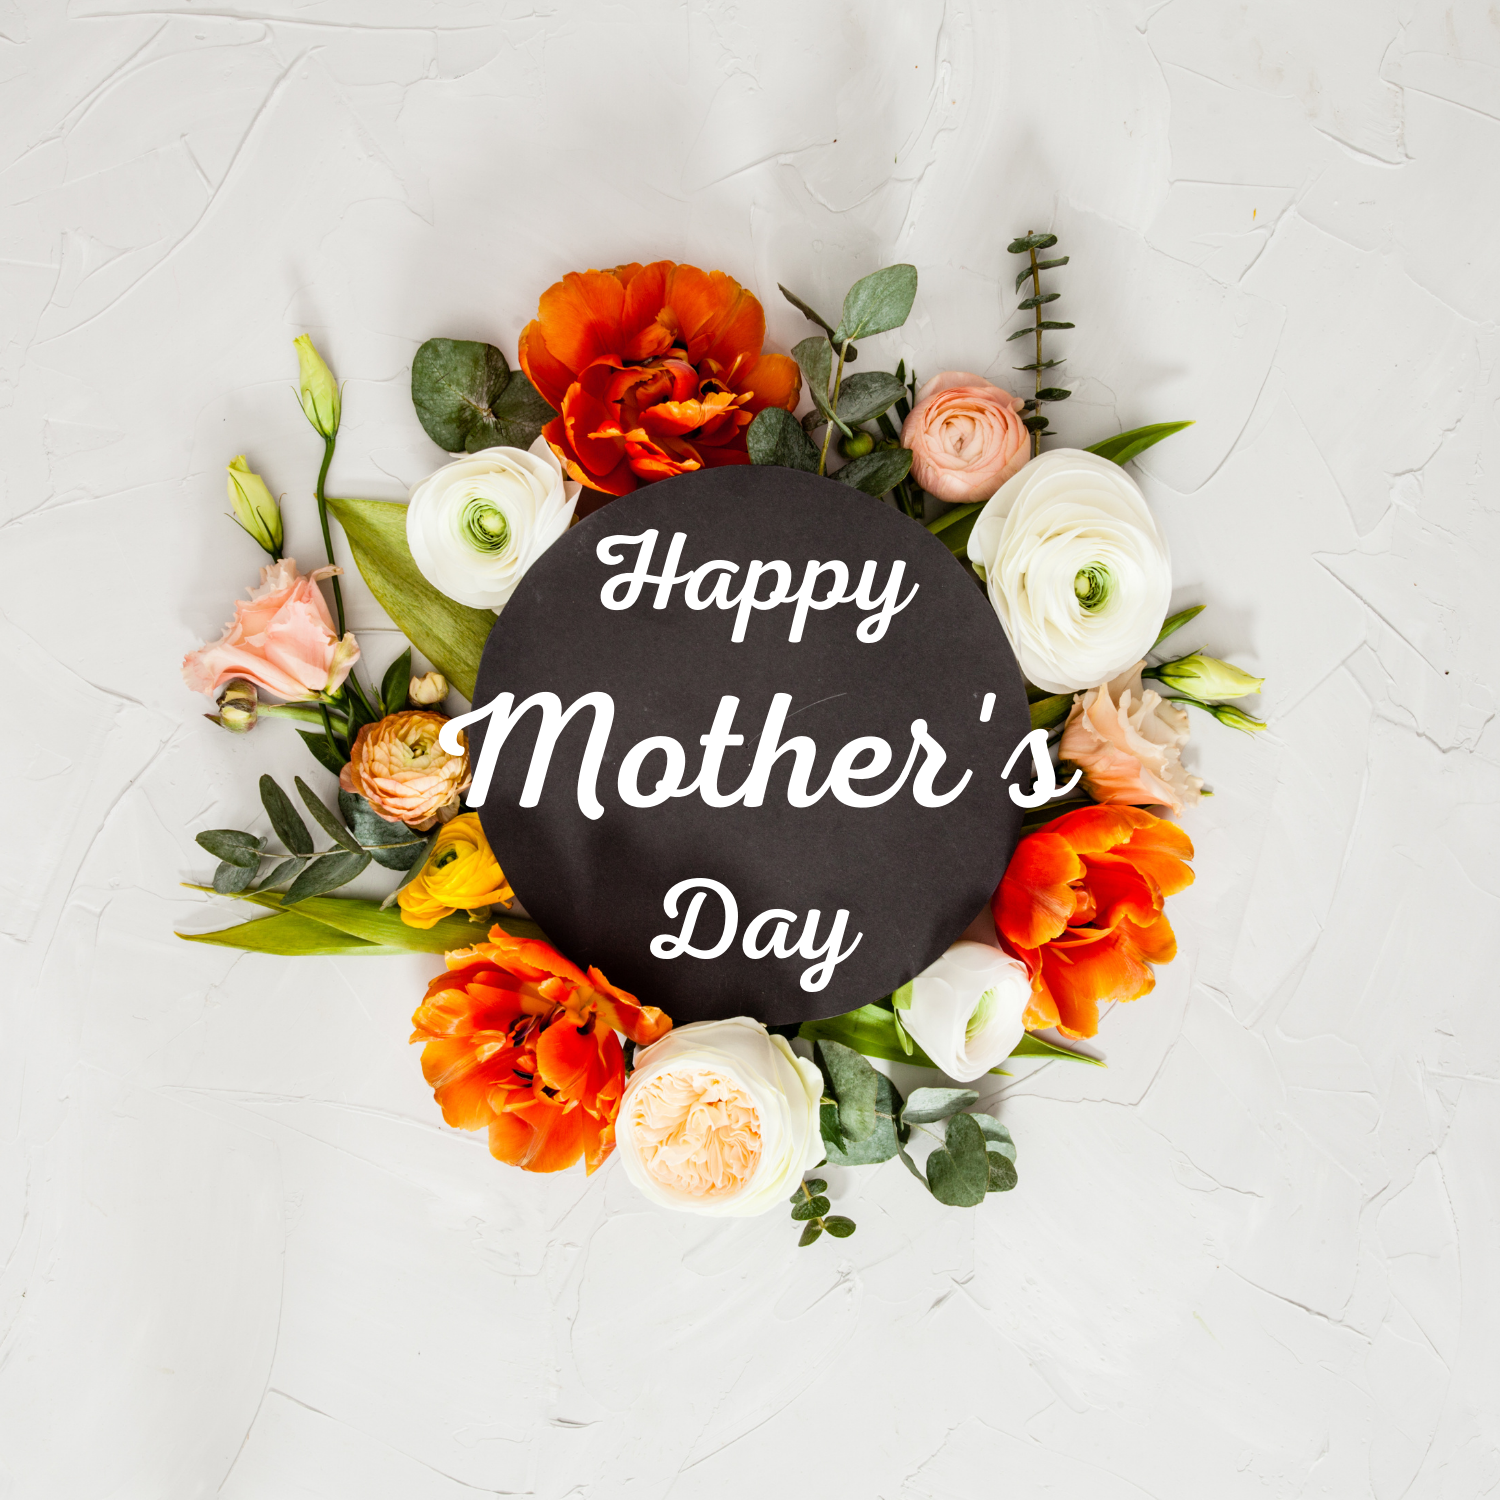 Mother's Day is almost here and you are all set!